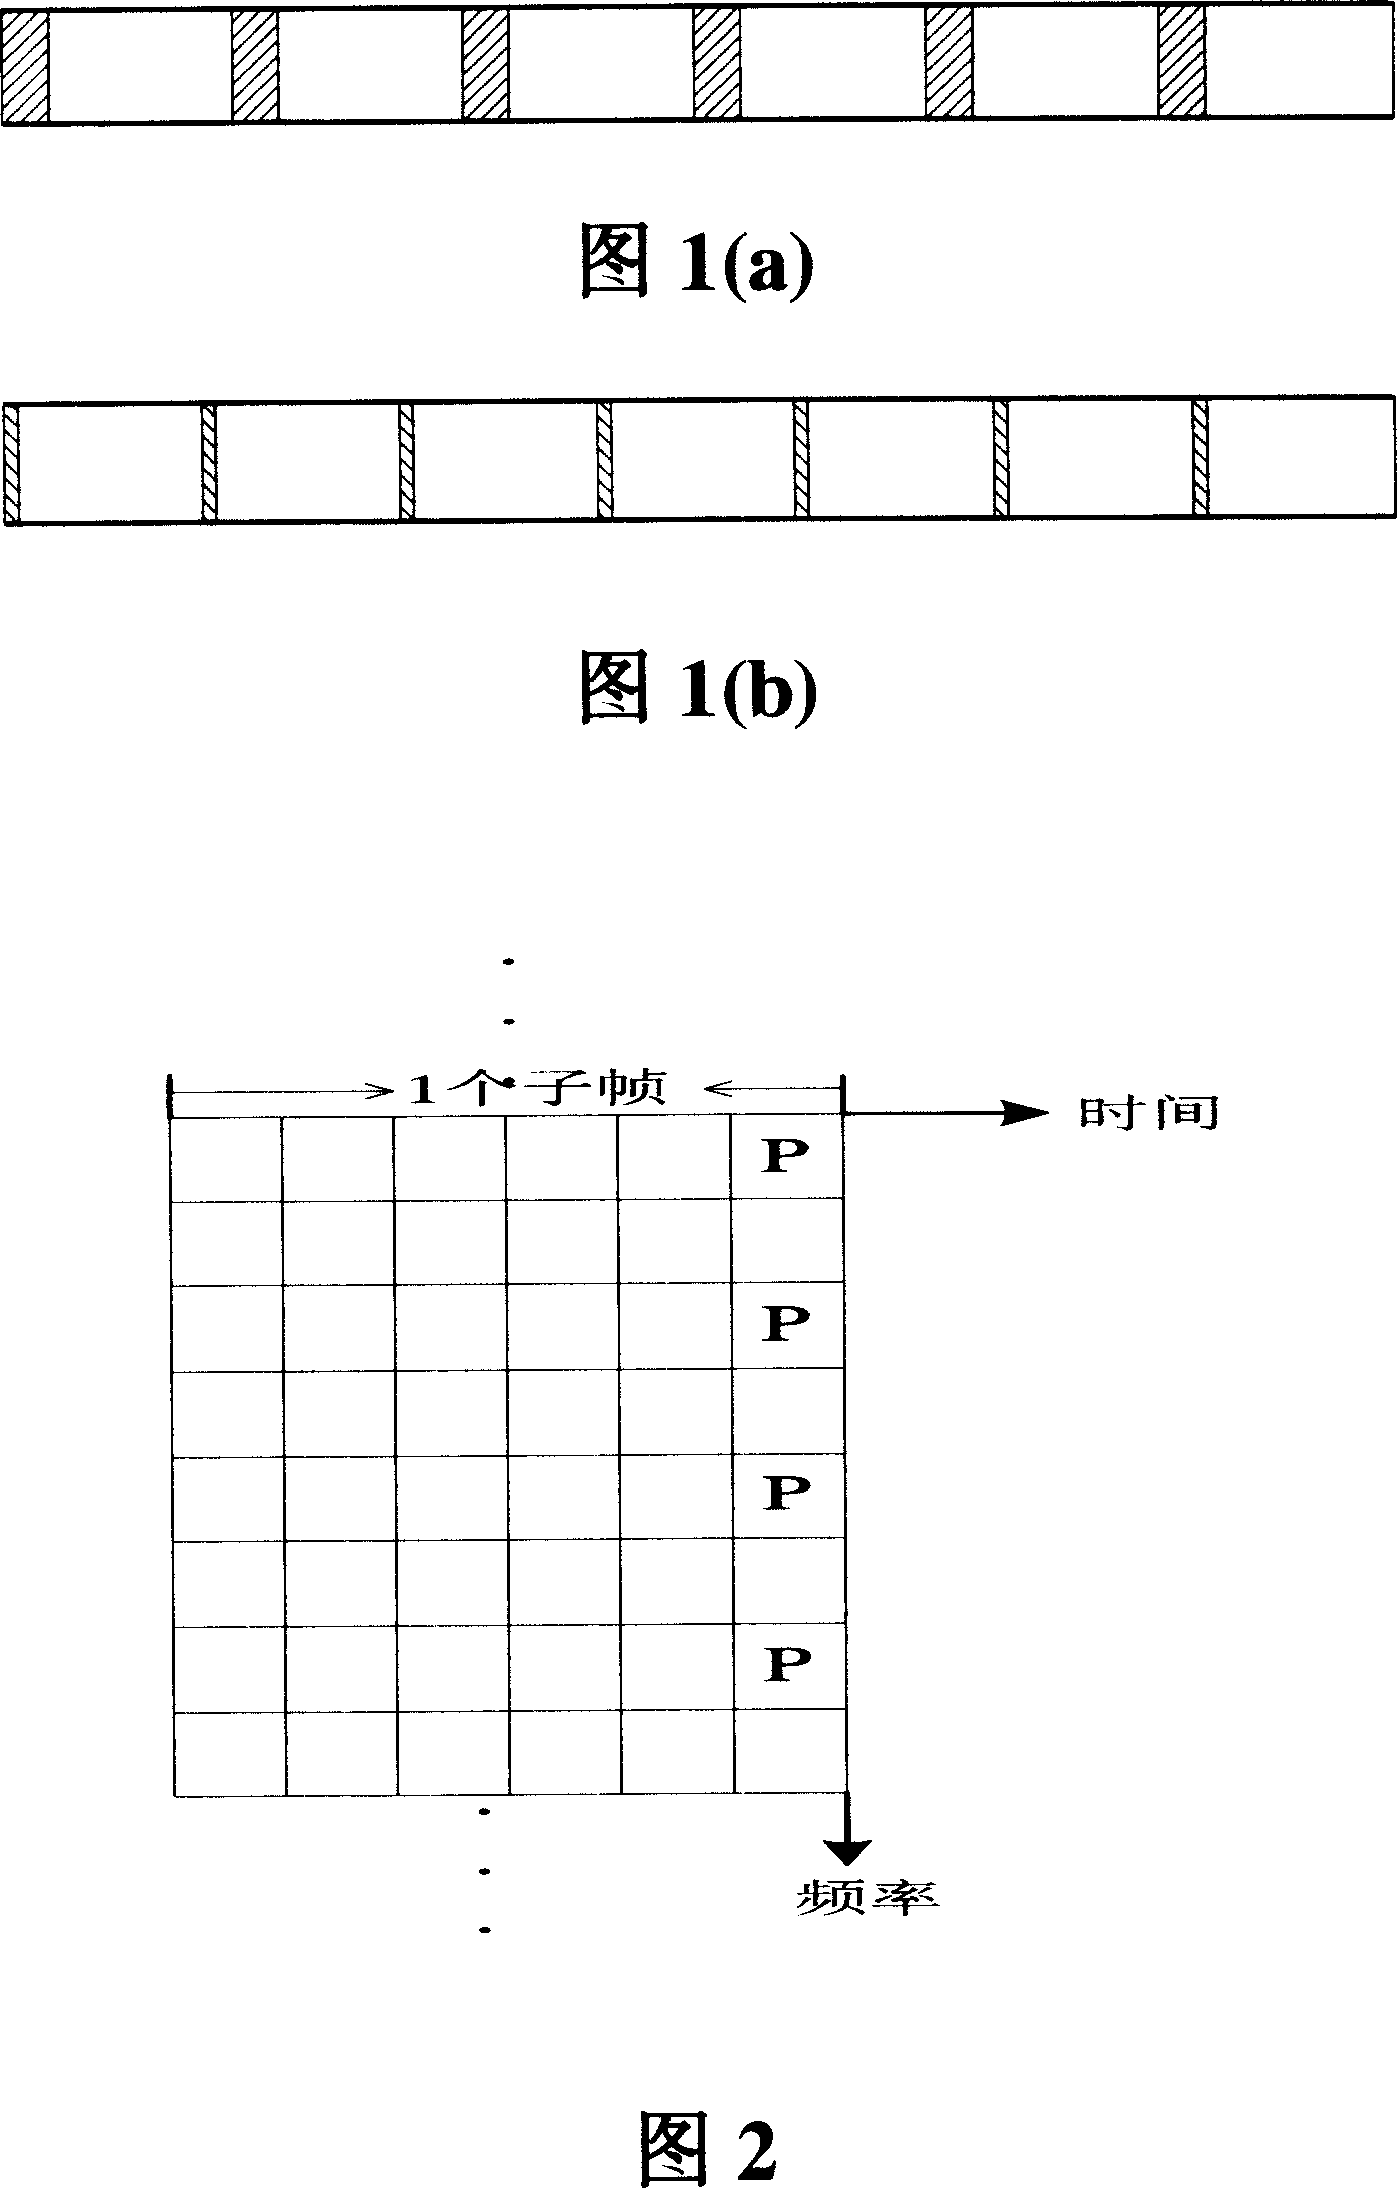 Pilot frequency signal sending method for orthogonal frequency division multiplex system